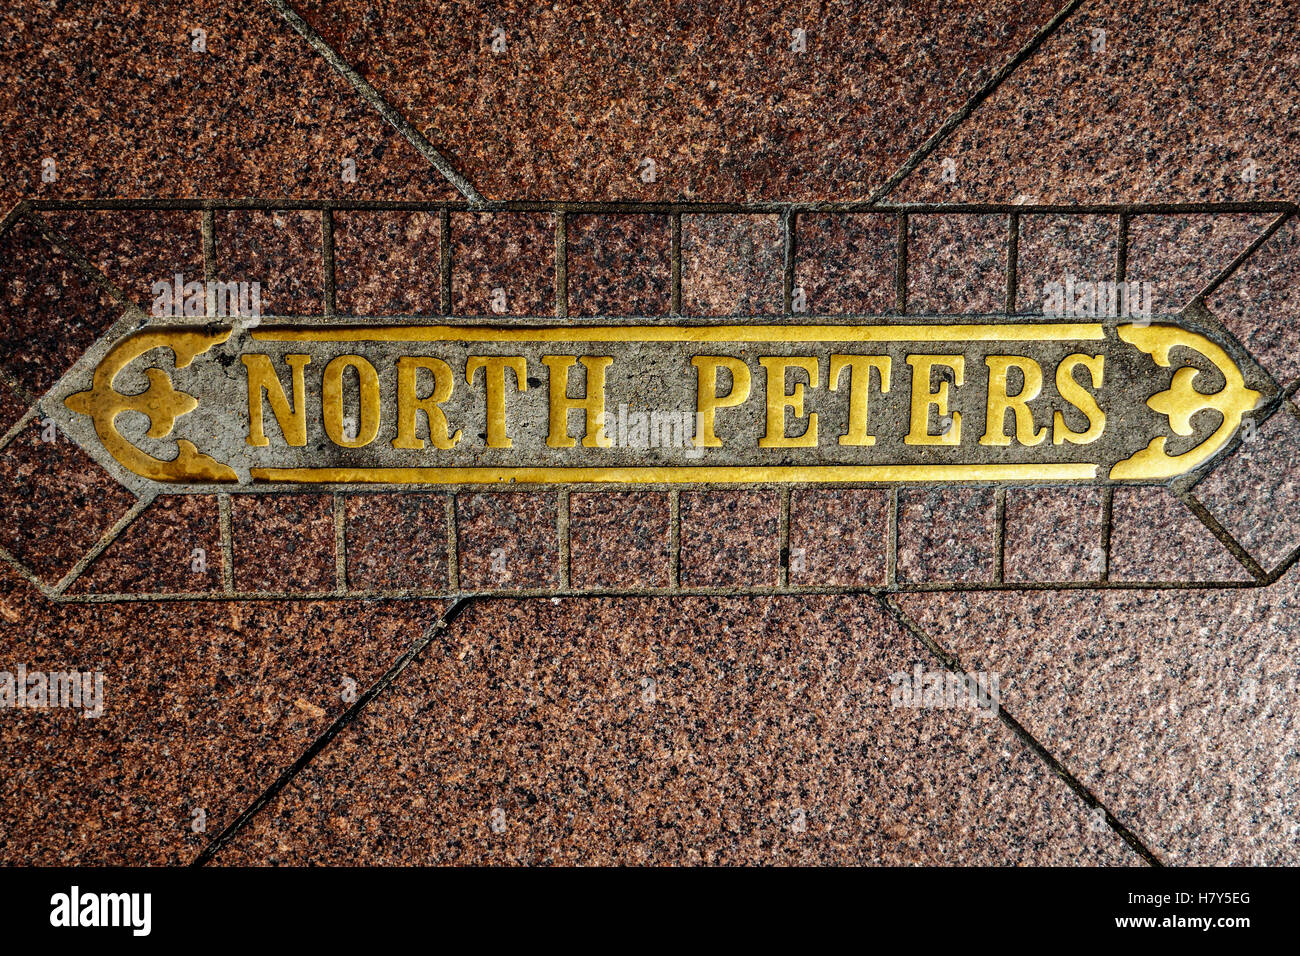 Street Sign In Pavement labeled North Peters. Stock Photo